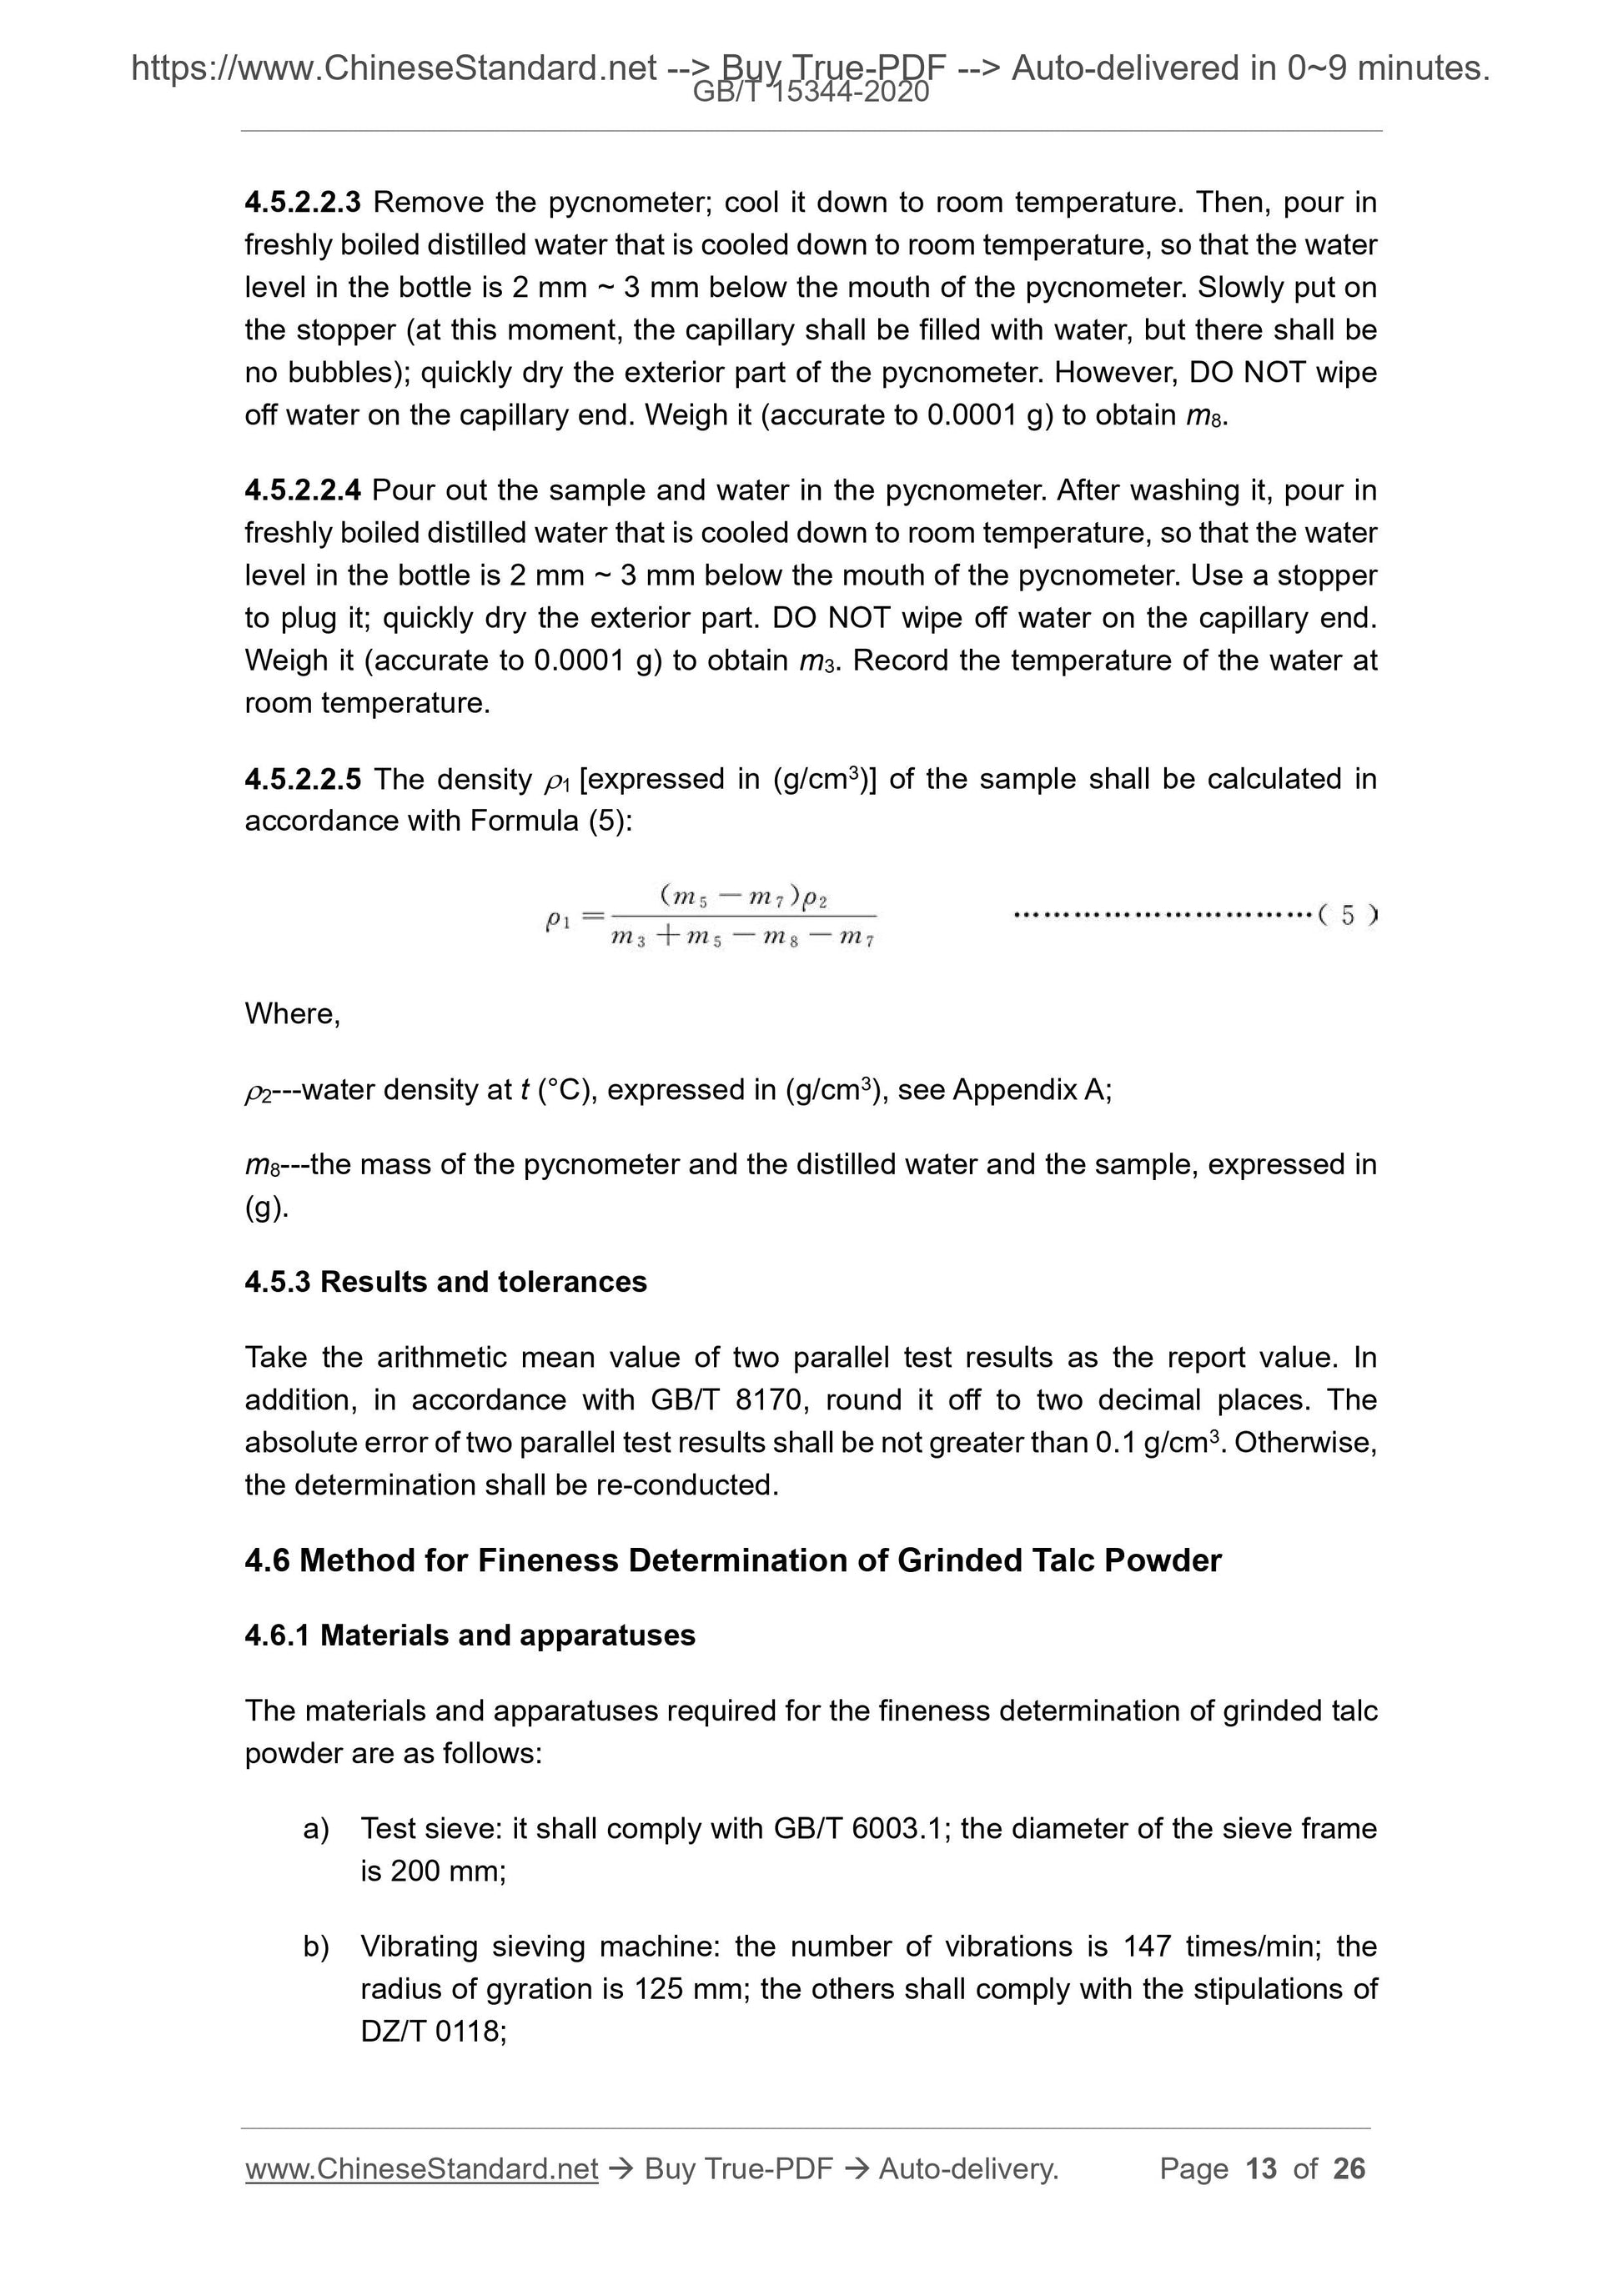 GB/T 15344-2020 Page 6